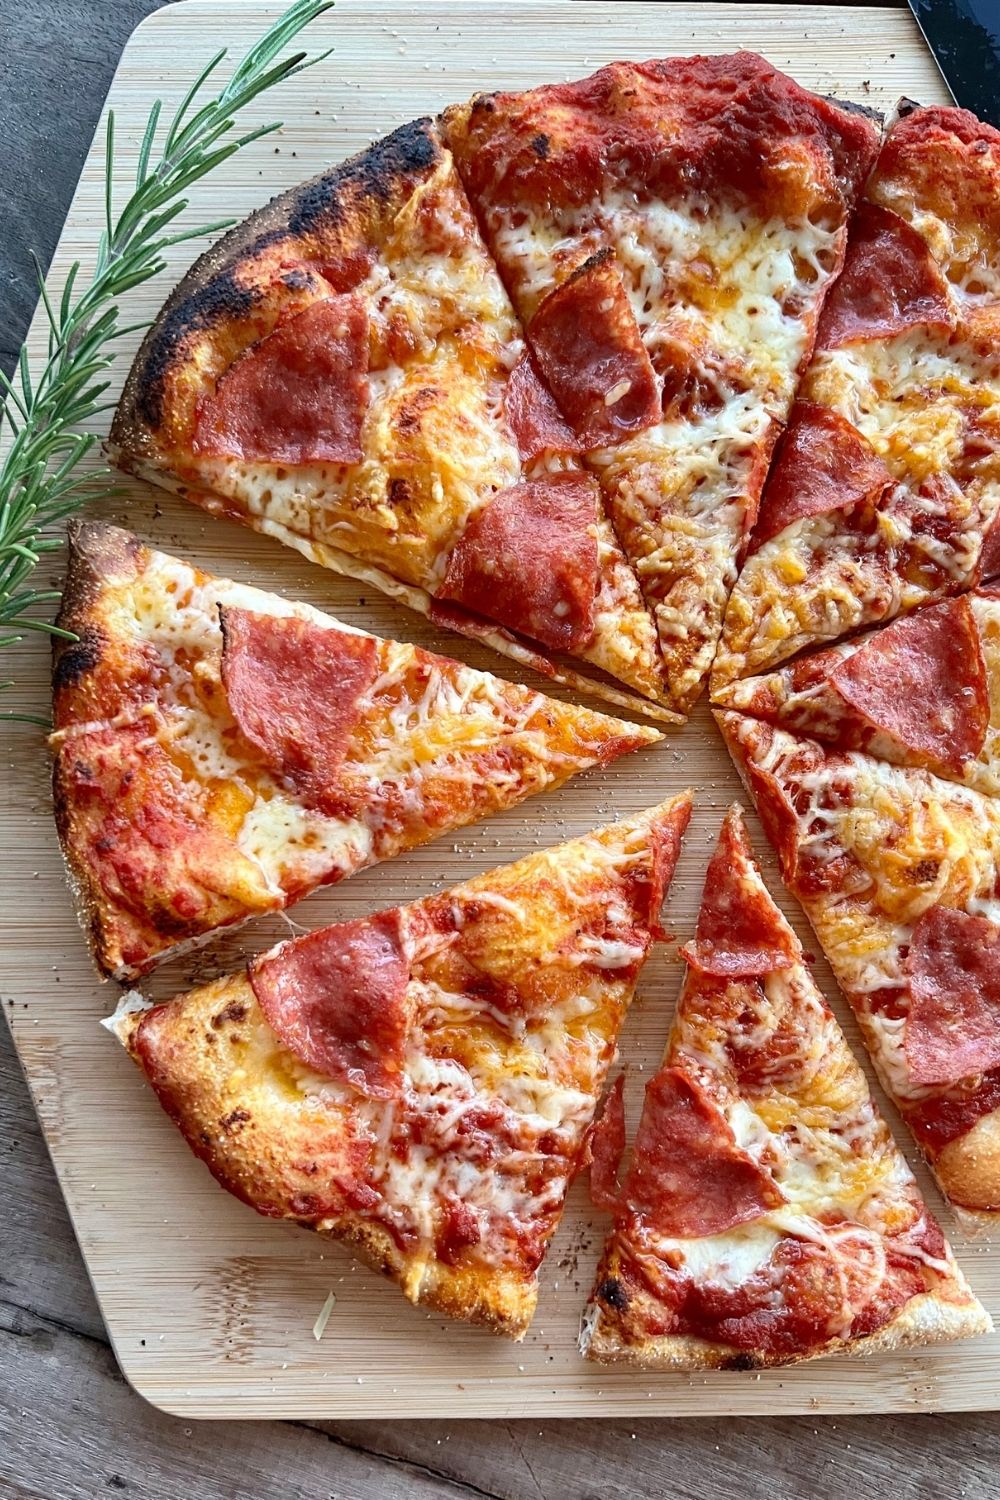 These Homemade Pizza Recipes Are So Good, You'll Never Order In Again